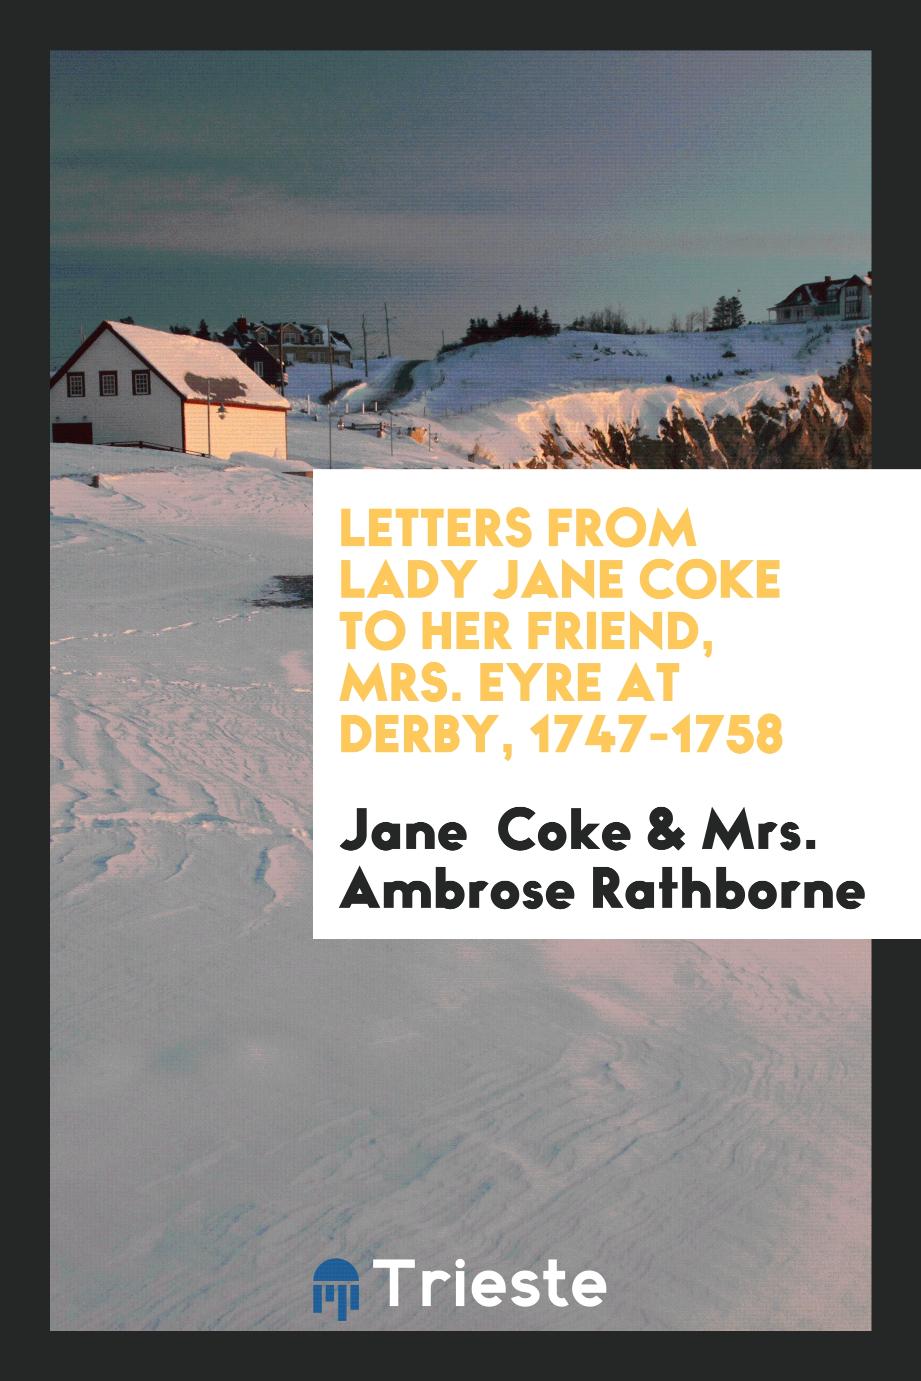 Letters from Lady Jane Coke to her friend, Mrs. Eyre at Derby, 1747-1758